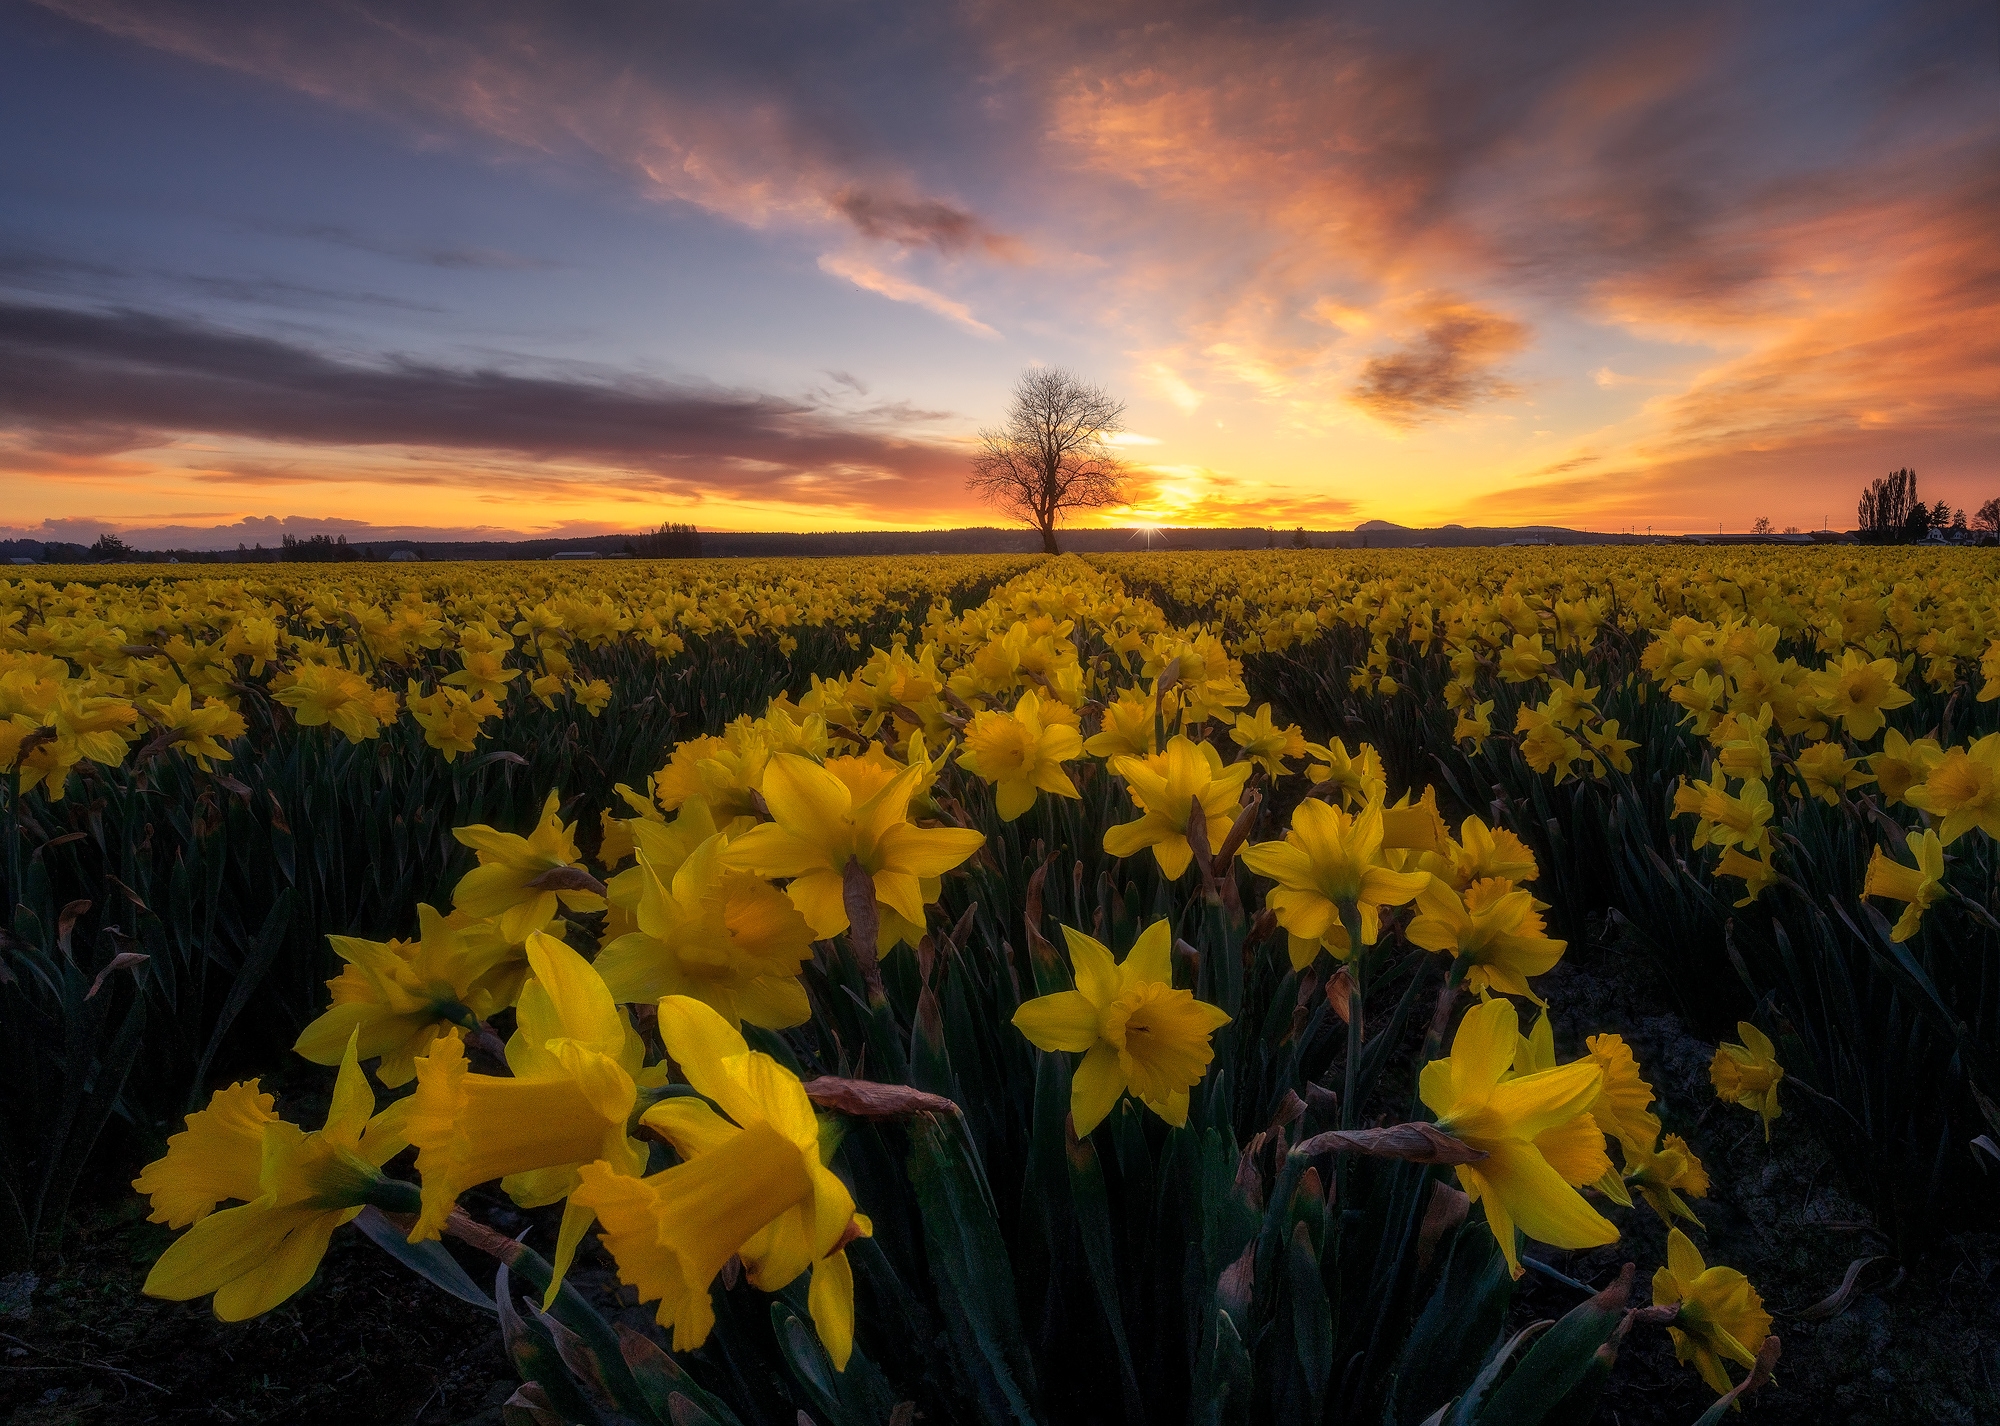 Field of daffodils at sunset